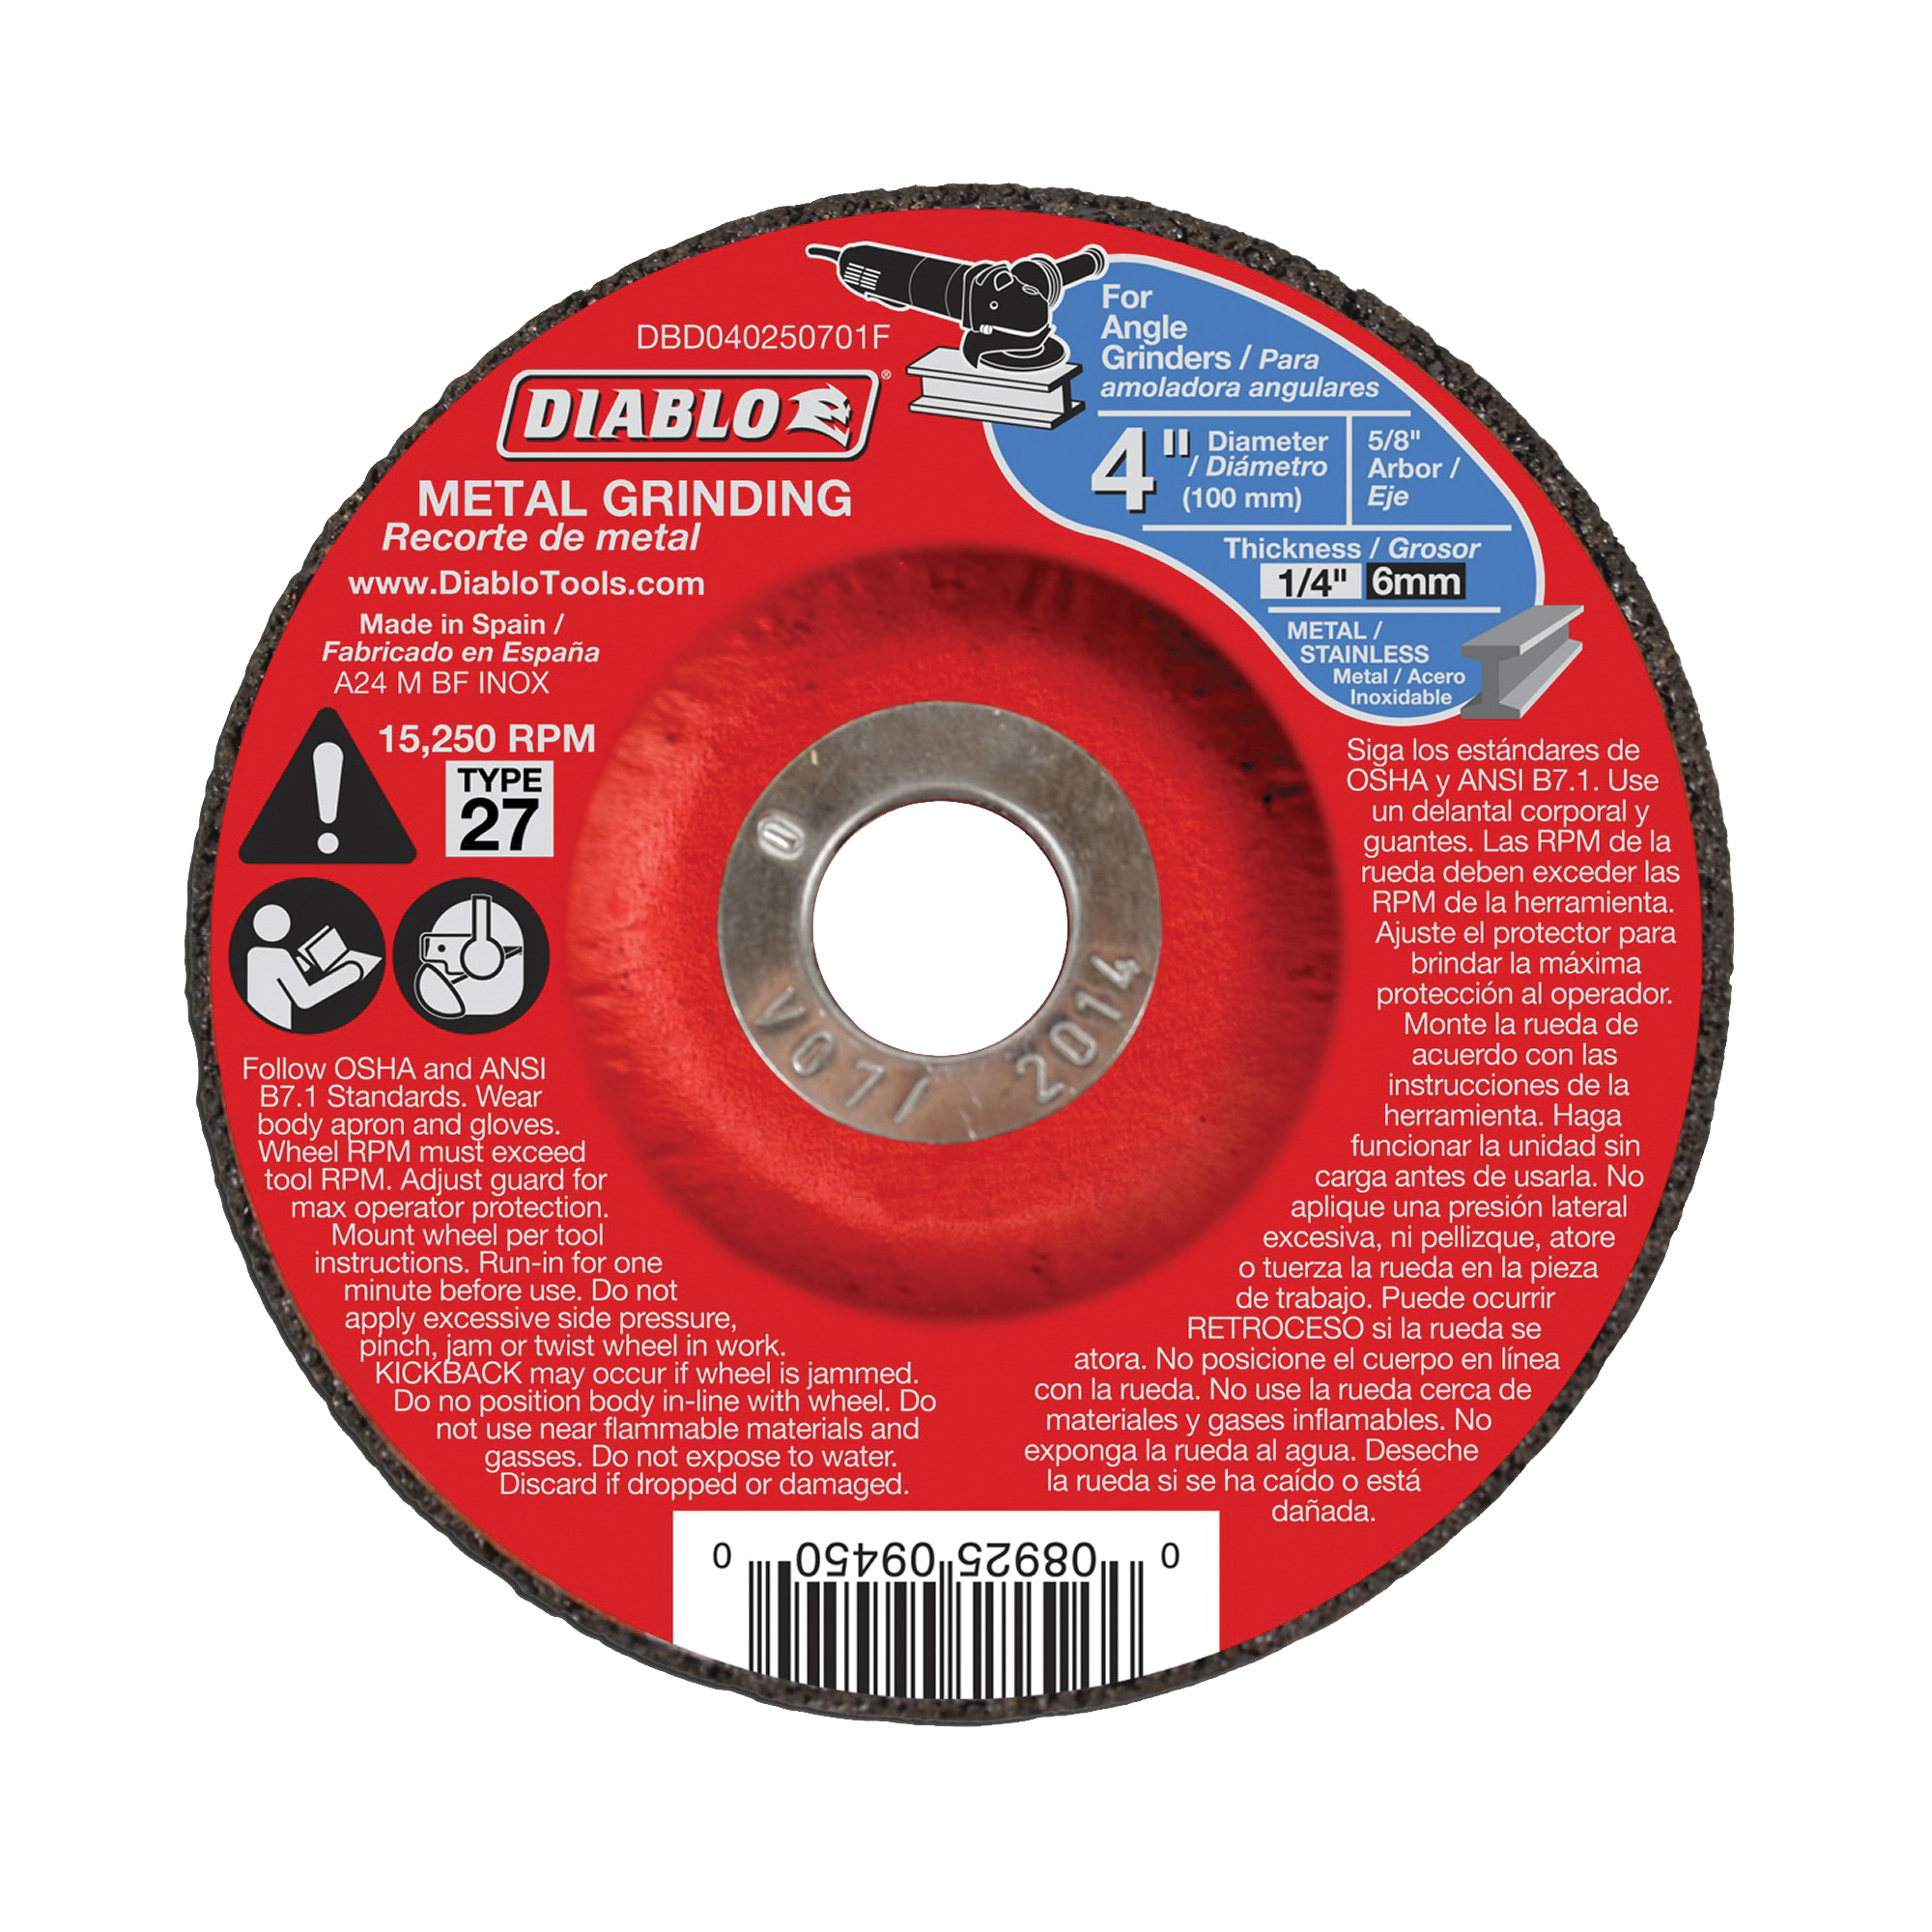 DBD040250701F Grinding Wheel, 4 in Dia, 1/4 in Thick, 5/8 in Arbor, Aluminum Oxide Abrasive